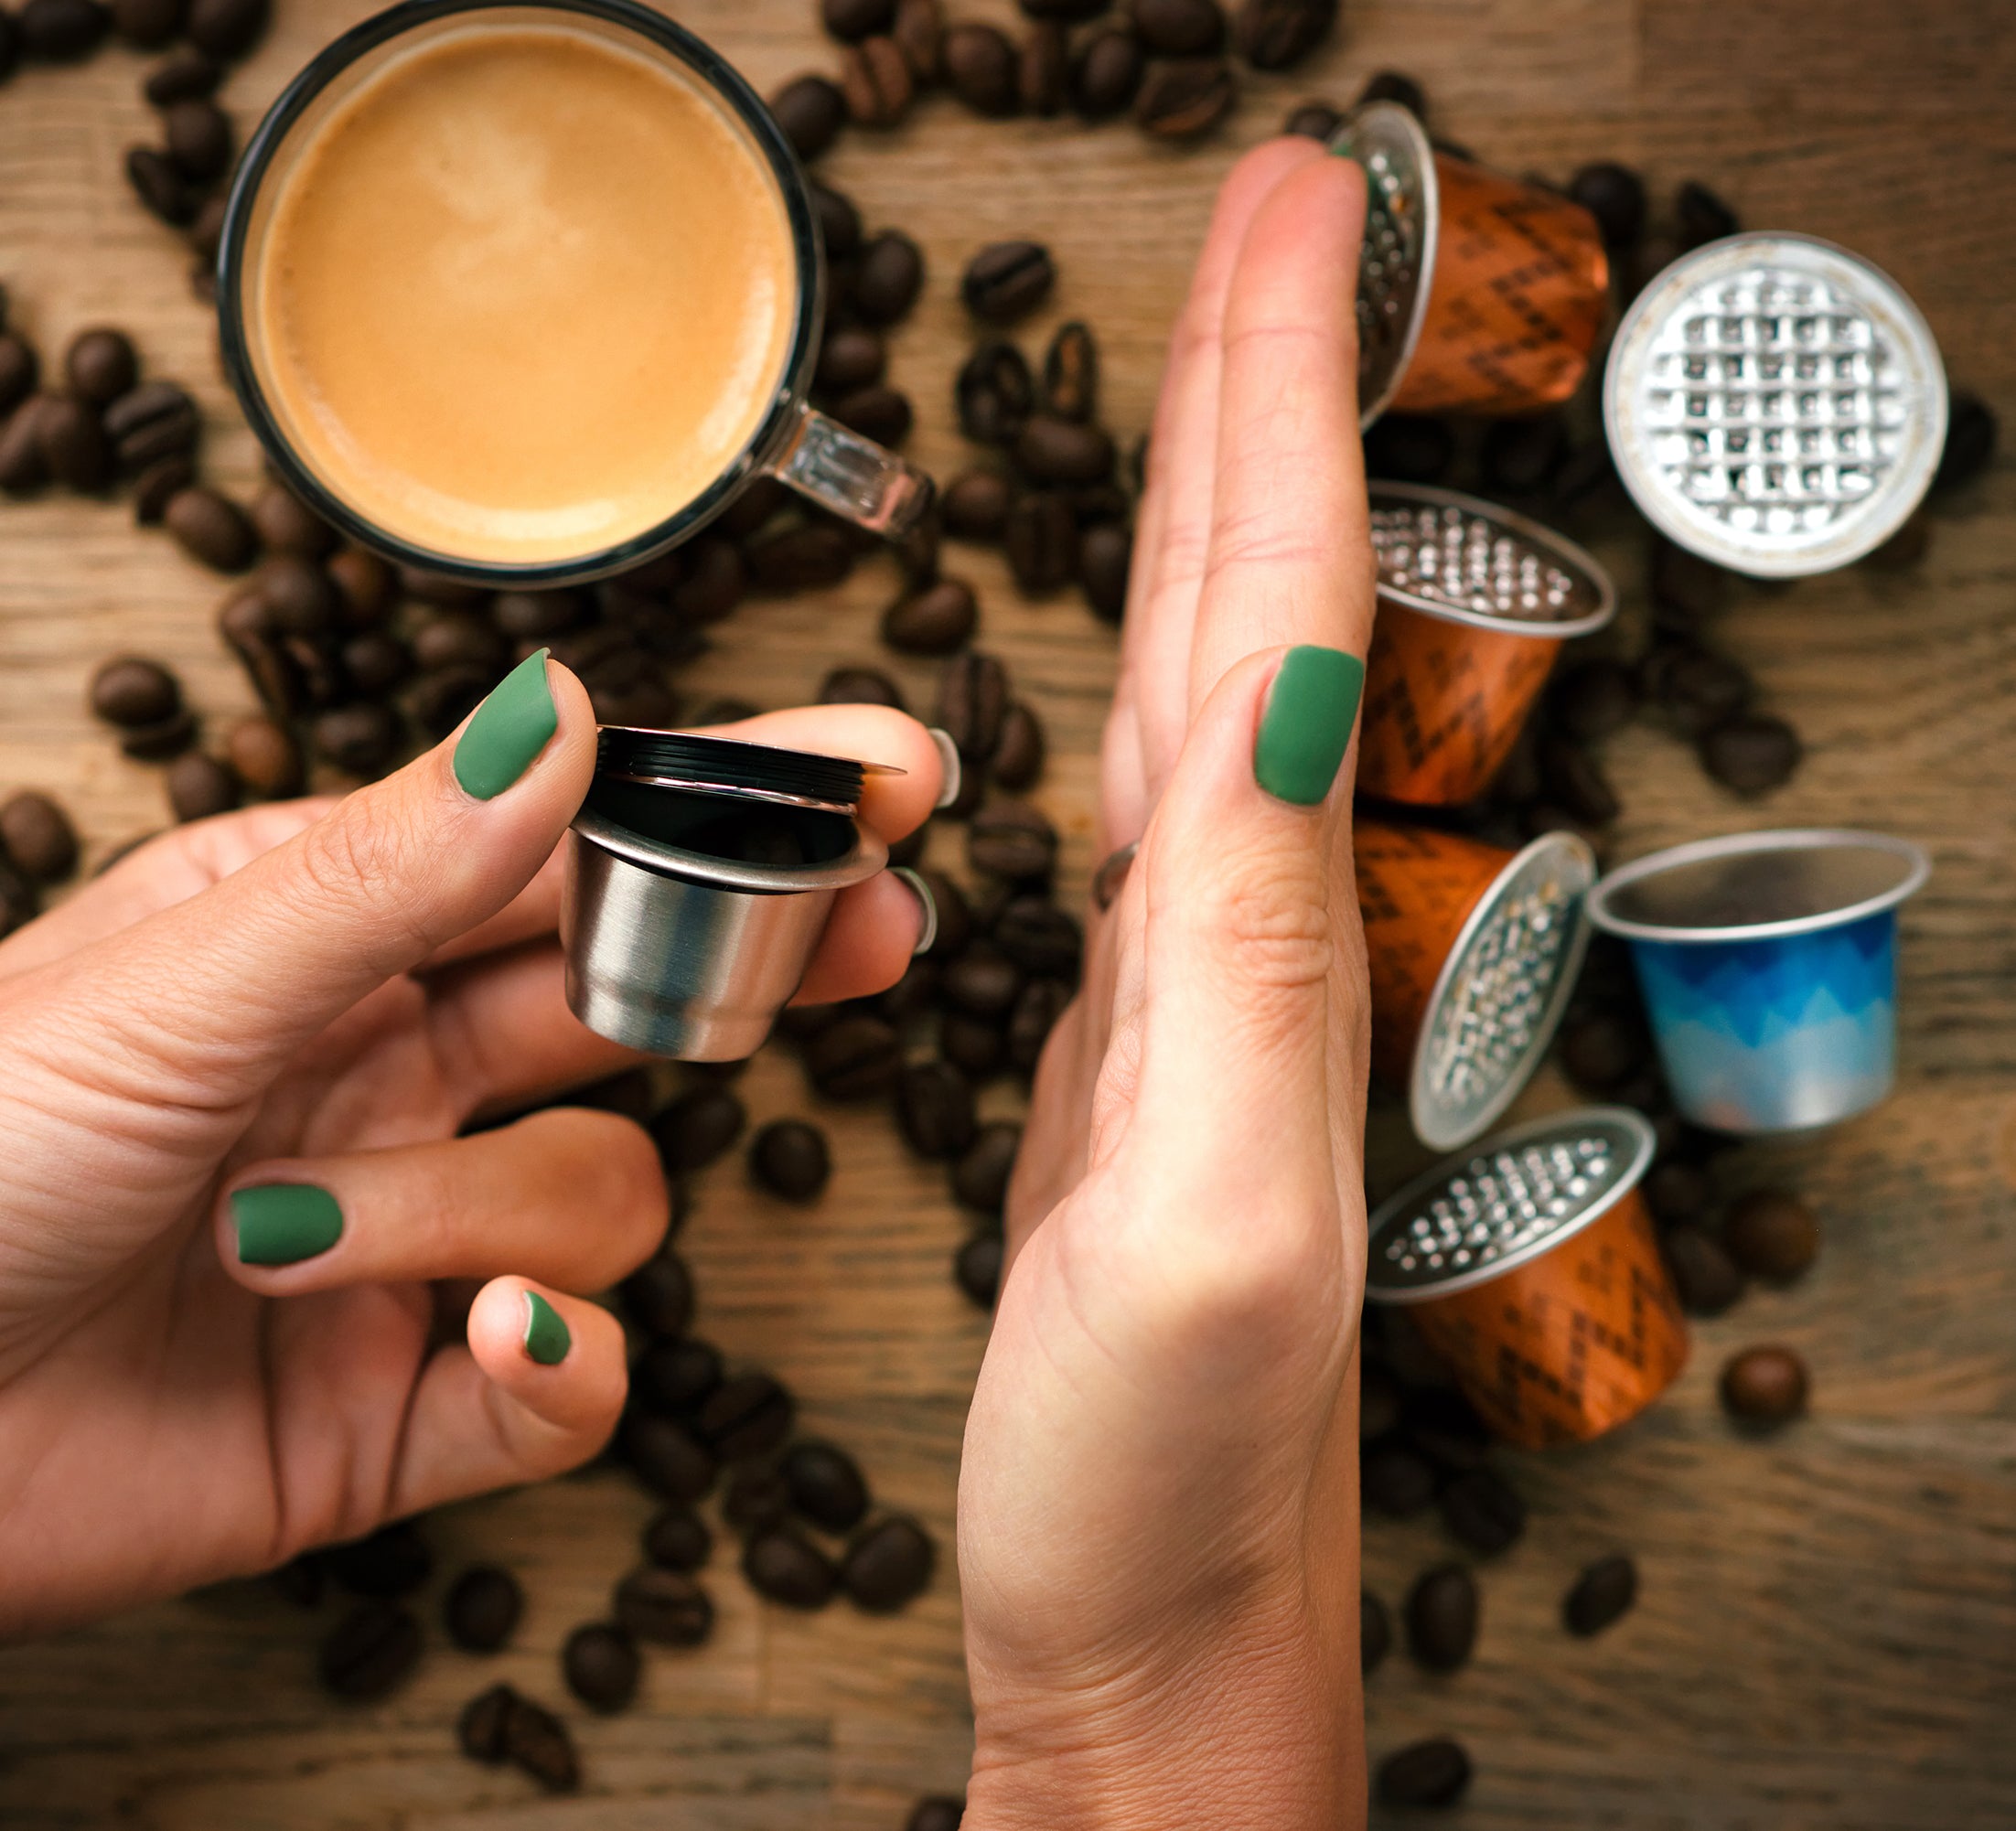 Enjoy Delicious Coffee Sustainably with Reusable Coffee Pods